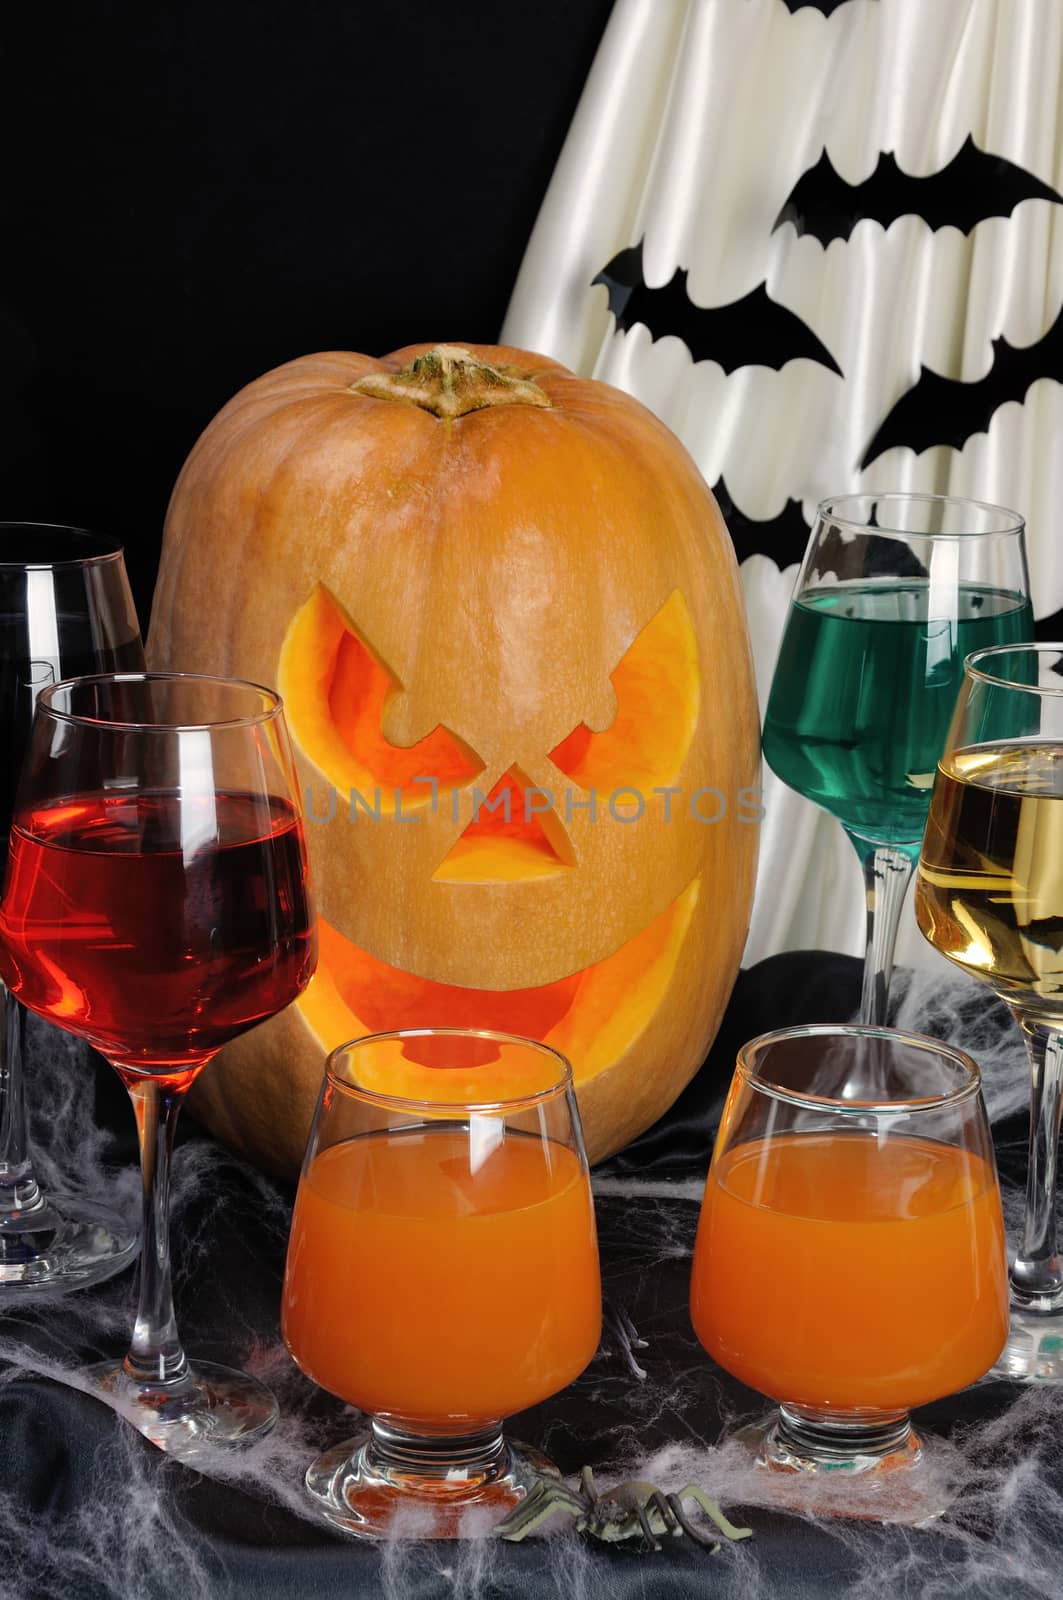 Drinks on the table in honor of Halloween by Apolonia